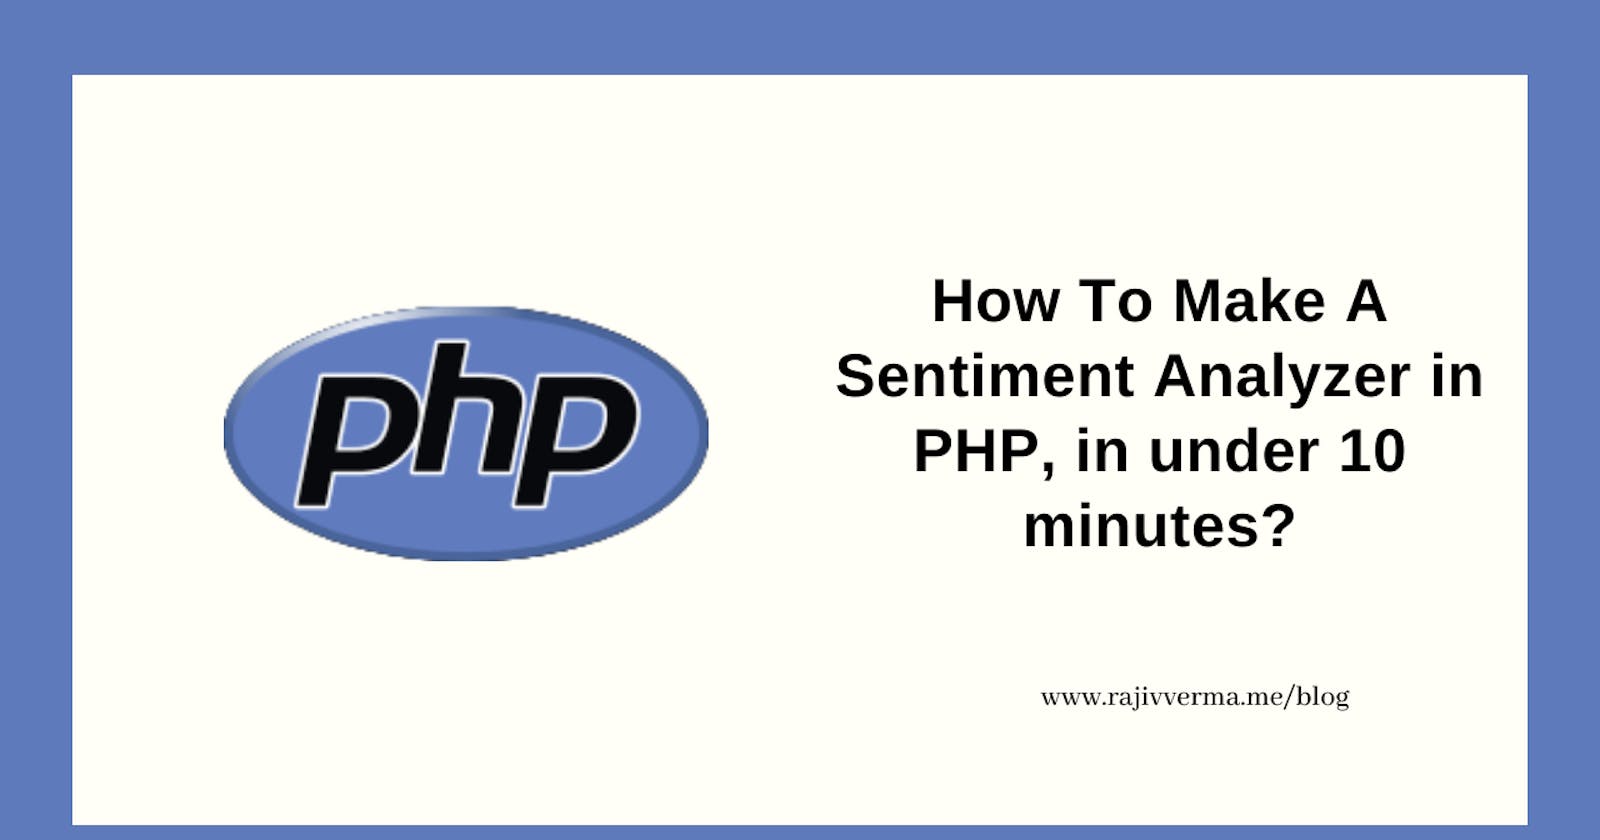 How To Make A Sentiment Analyzer In PHP, In Under 10 Minutes?